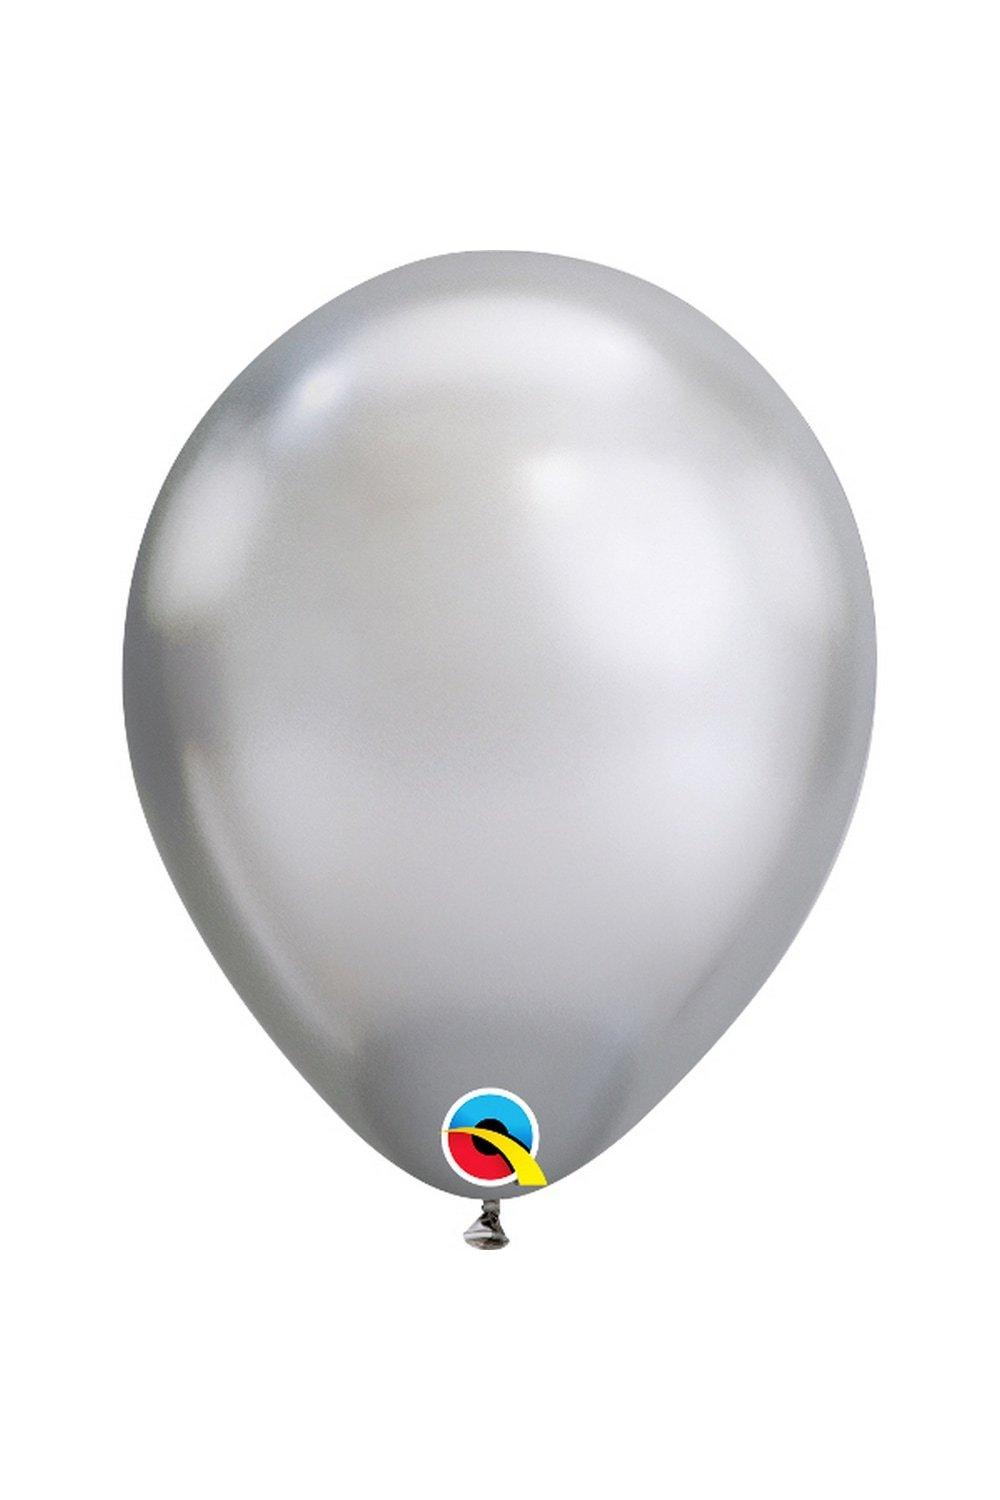 11 Inch Round Plain Latex Balloons (Pack of 25)